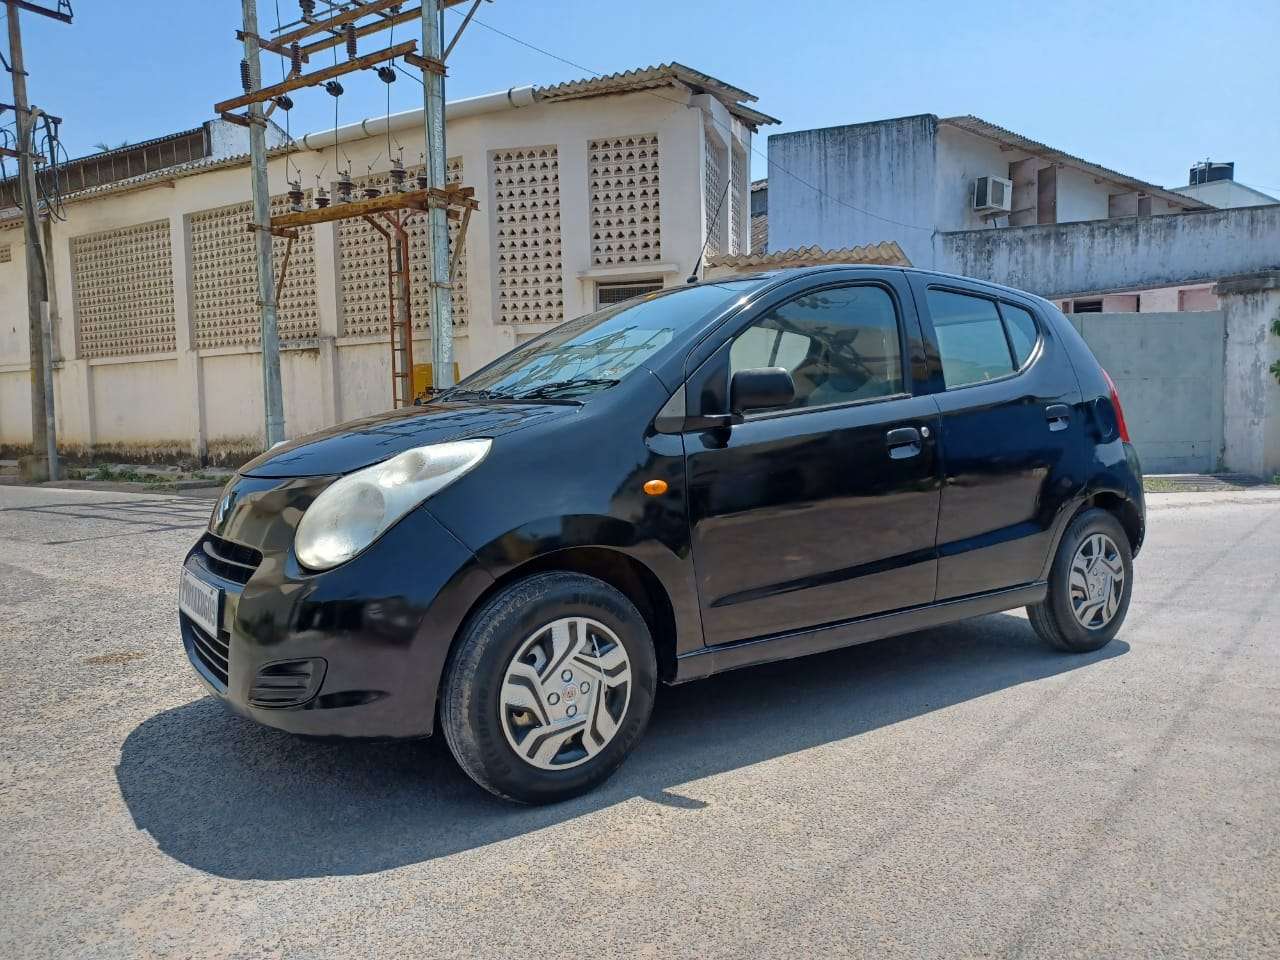 3141-for-sale-Maruthi-Suzuki-A-Star-Petrol-First-Owner-2009-PY-registered-rs-145000